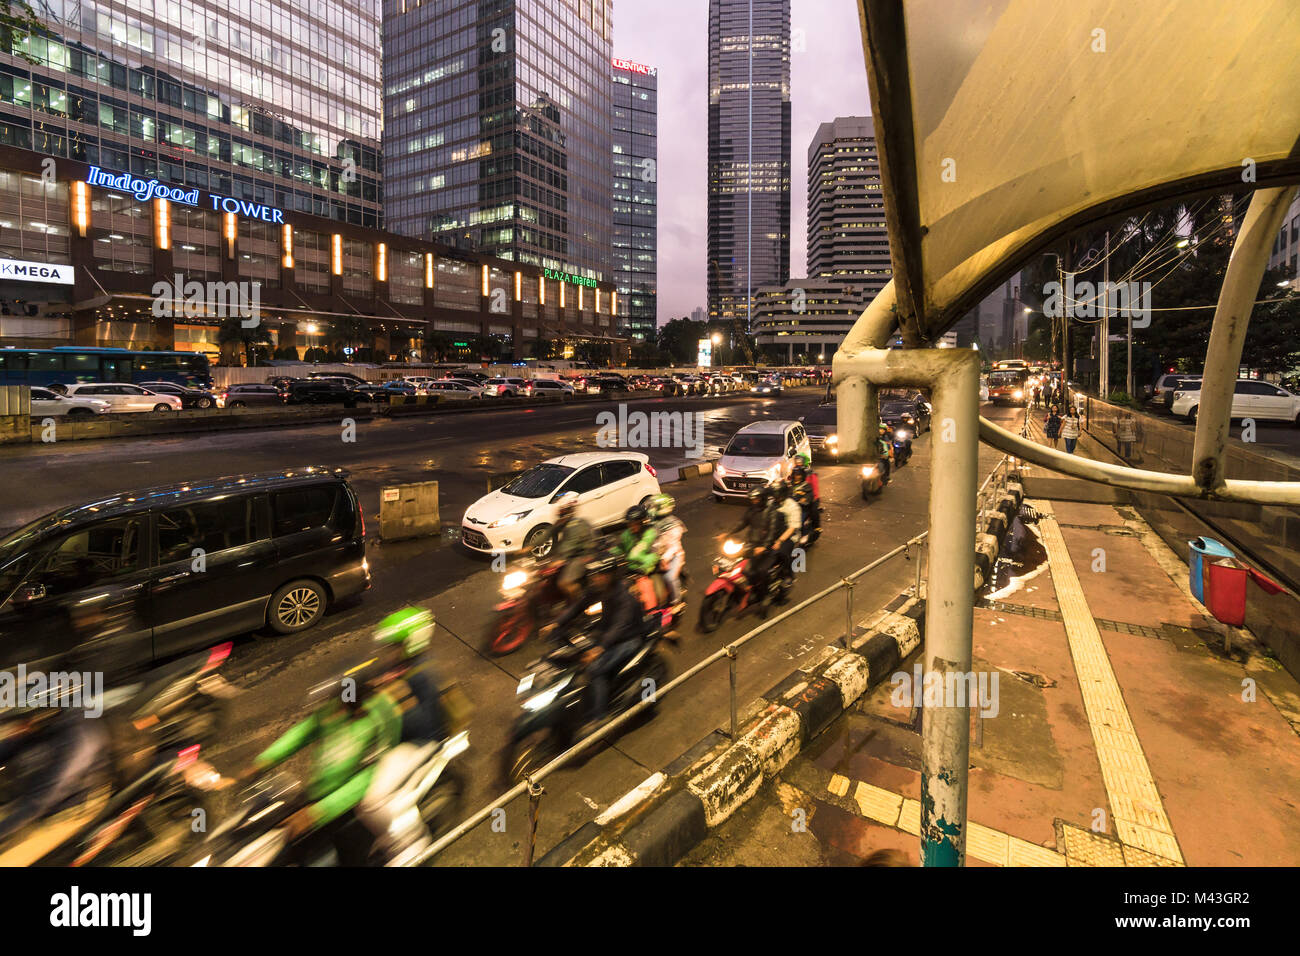 Jakarta, Indonesia - October 20 2017: Cars, buses motorcycles rushing on Sudirman street in Jakarta business district in Indonesia capital city at nig Stock Photo